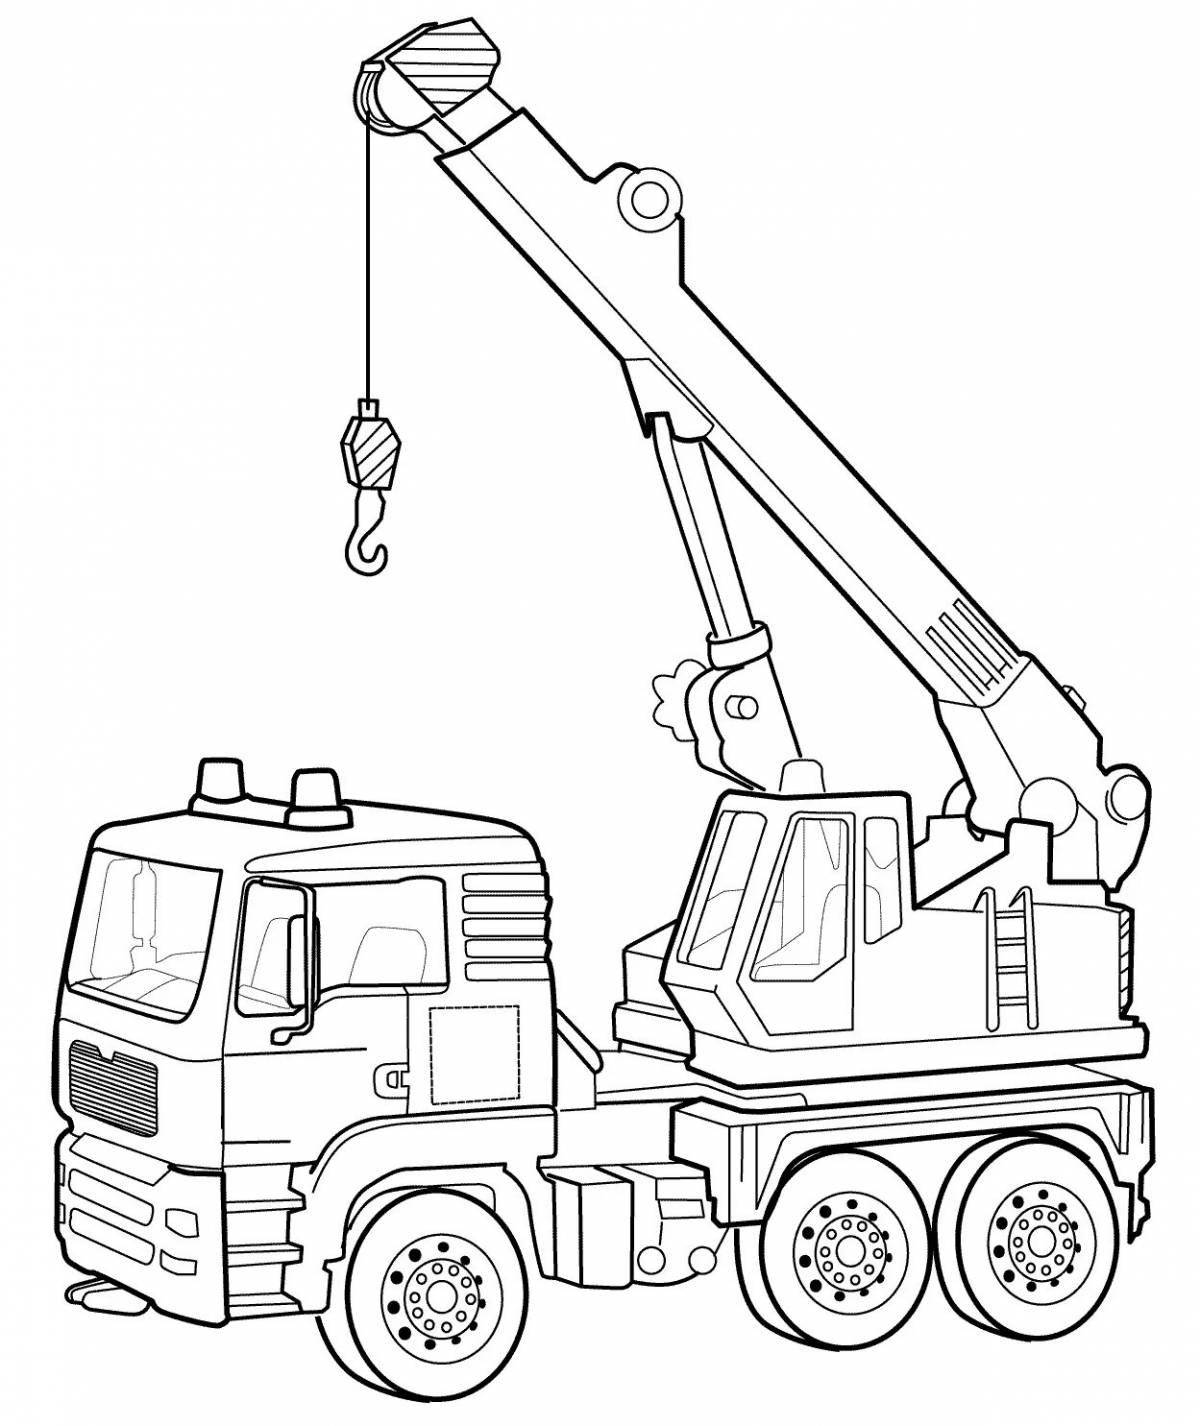 Great truck crane coloring page for students